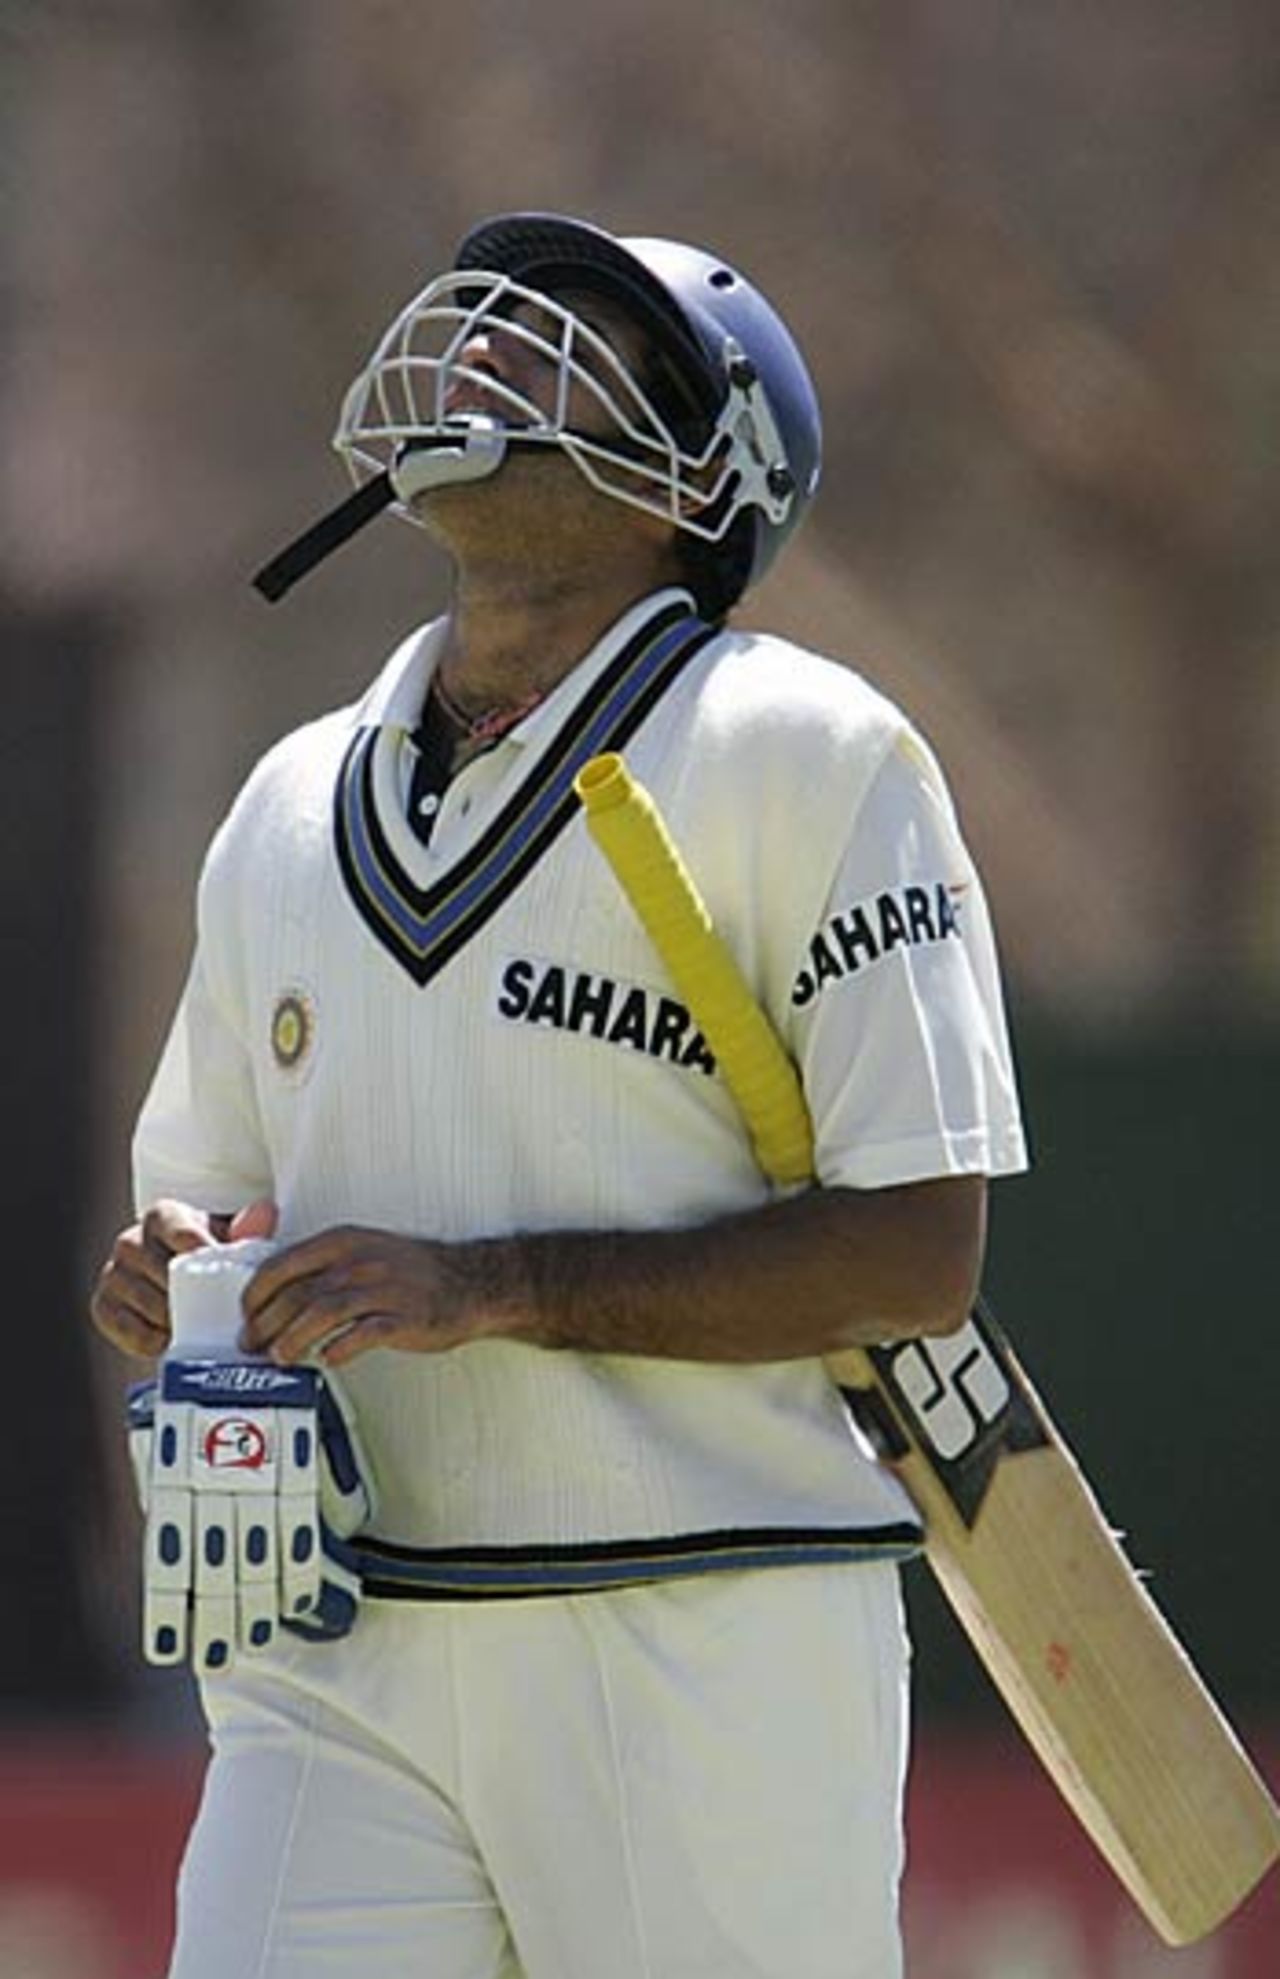 VVS Laxman is distraught after a silly run-out ended his fine innings, Zimbabwe v India, 1st Test, Bulawayo, September 15, 2005